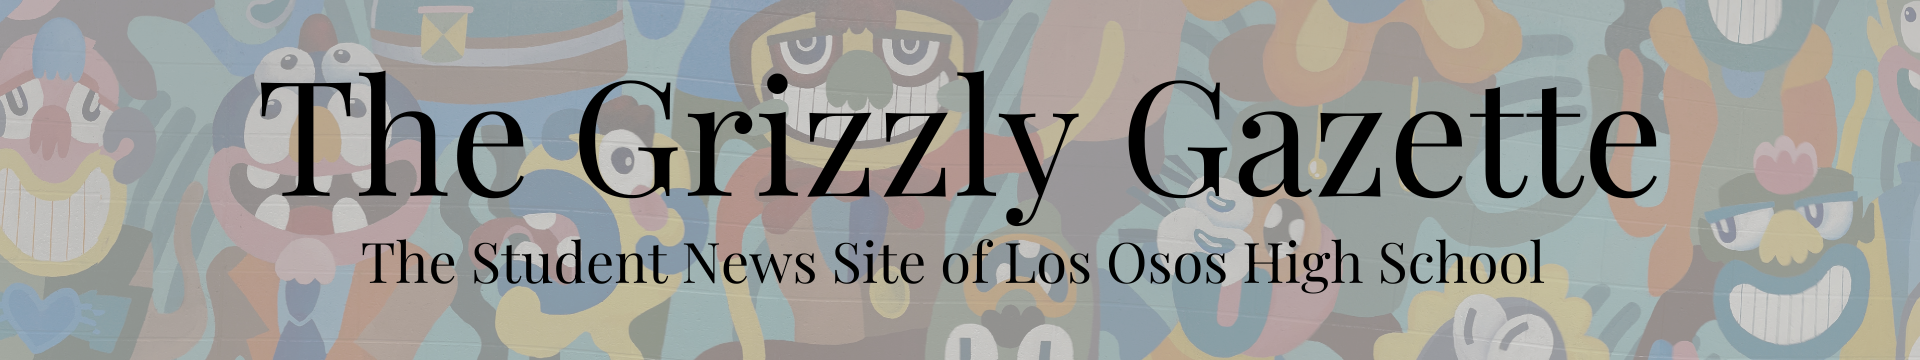 The Student News Site of Los Osos High School